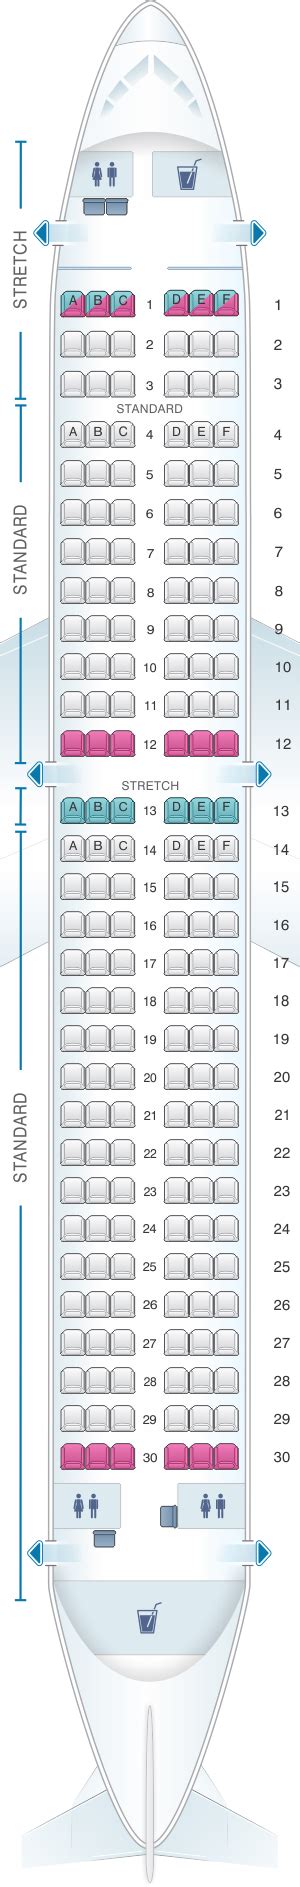 Seat Map Frontier Airlines Airbus A320 180pax Asiana Airlines Air